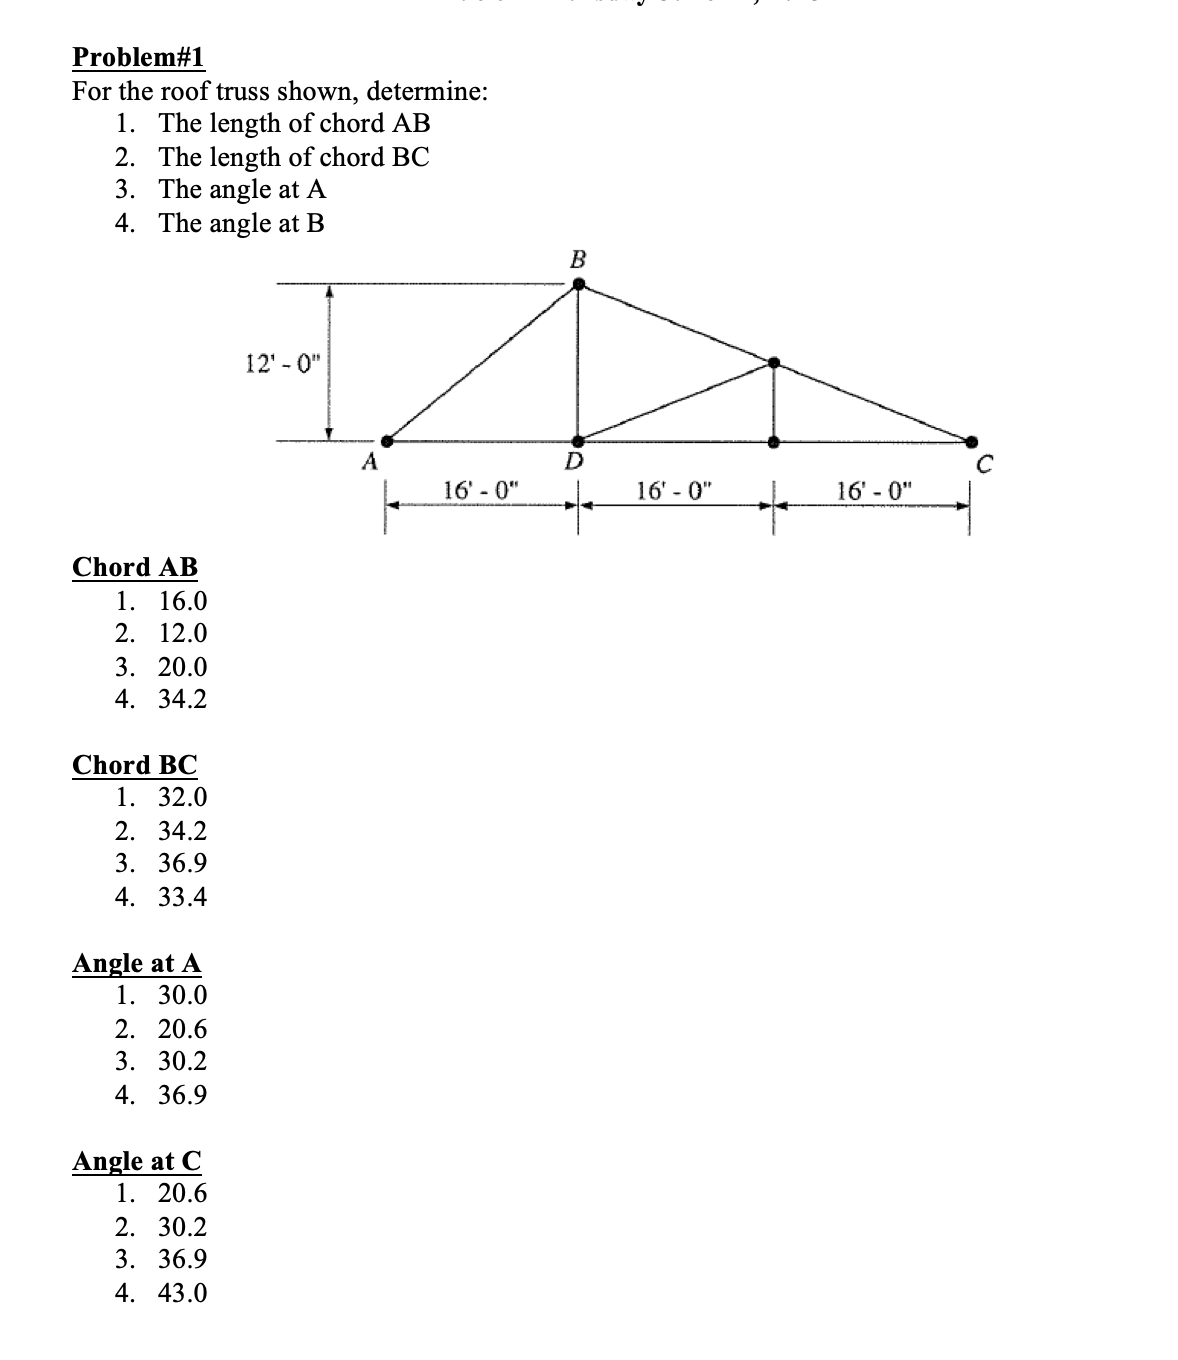 Problem#1
For the roof truss shown, determine:
1. The length of chord AB
2. The length of chord BC
3. The angle at A
4. The angle at B
Chord AB
1. 16.0
2. 12.0
3. 20.0
4. 34.2
Chord BC
1. 32.0
2. 34.2
3. 36.9
4. 33.4
Angle at A
1. 30.0
2. 20.6
3. 30.2
4. 36.9
Angle at C
1. 20.6
2. 30.2
3. 36.9
4. 43.0
12'-0"
A
16'-0"
B
D
e
16'-0"
+
16'-0"
C